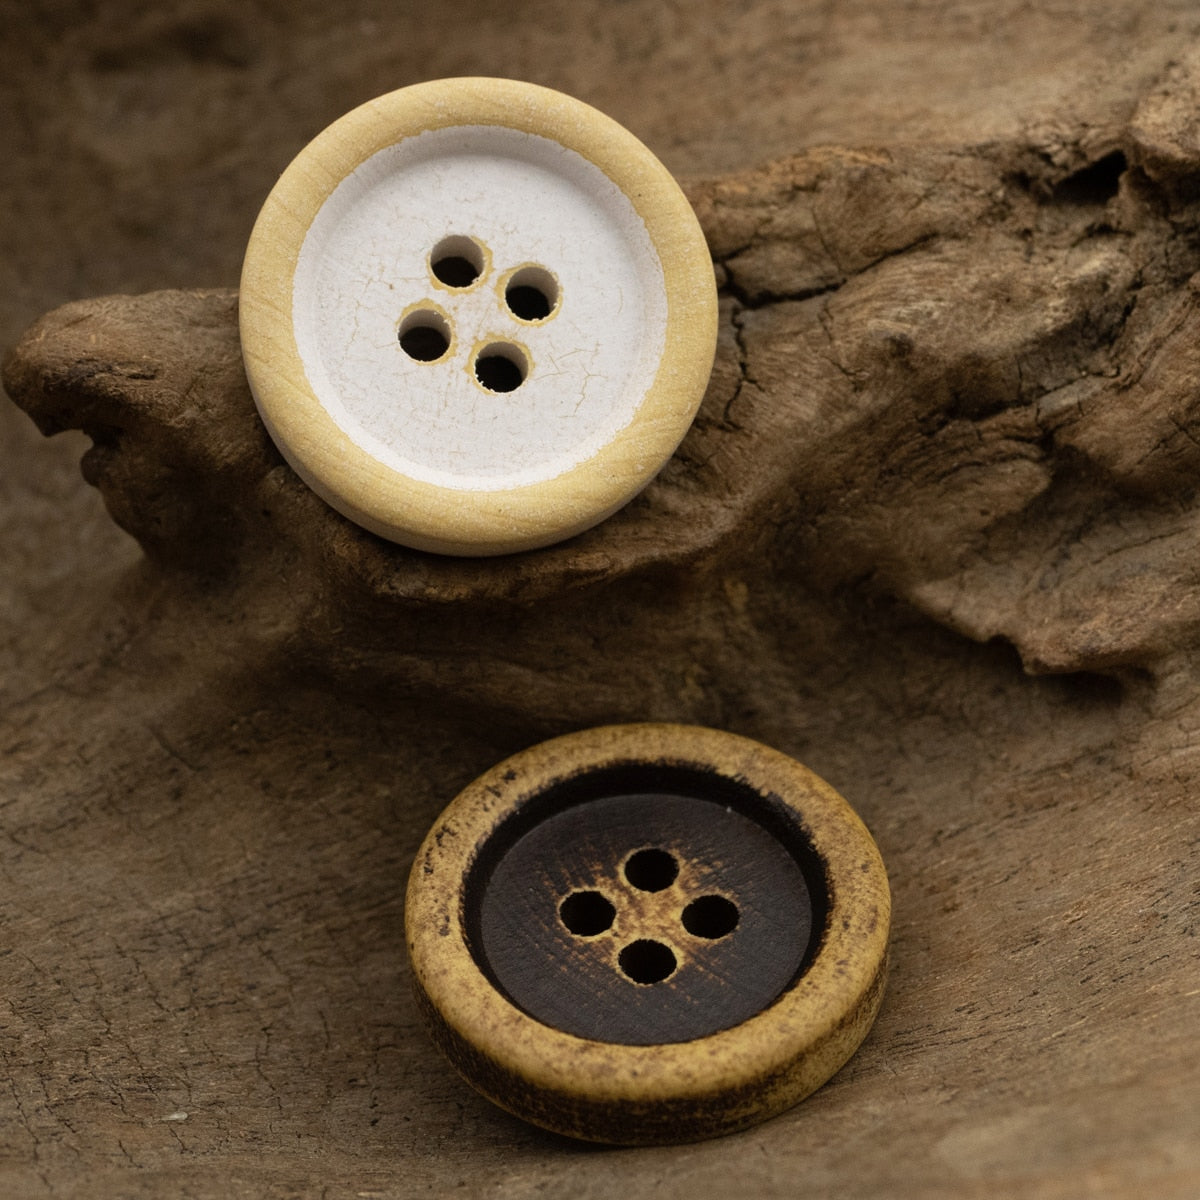 15mm/18mm/20mm Vintage Wooden Buttons Round Rim for Clothing White Brown